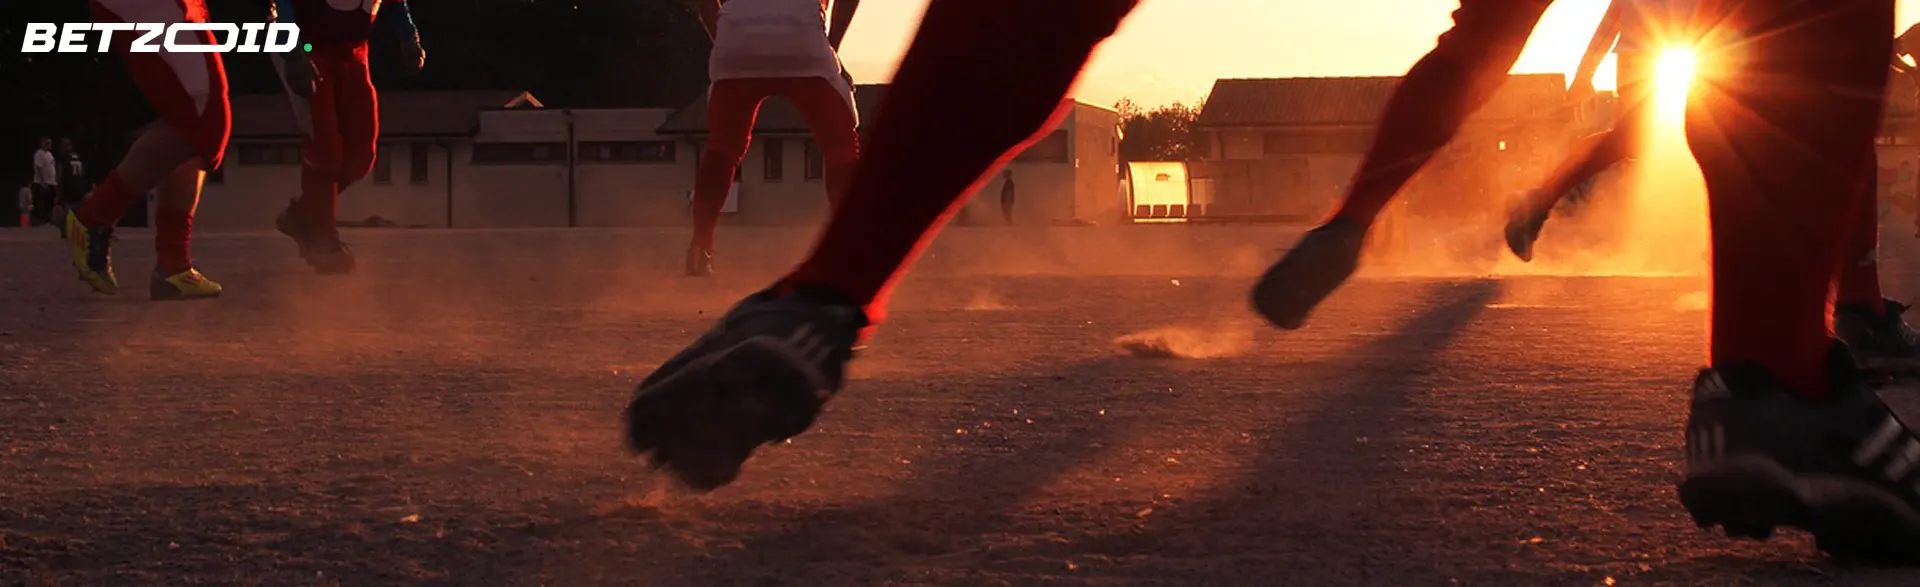 Soccer players in action at sunset, kicking up dust on a dry field.